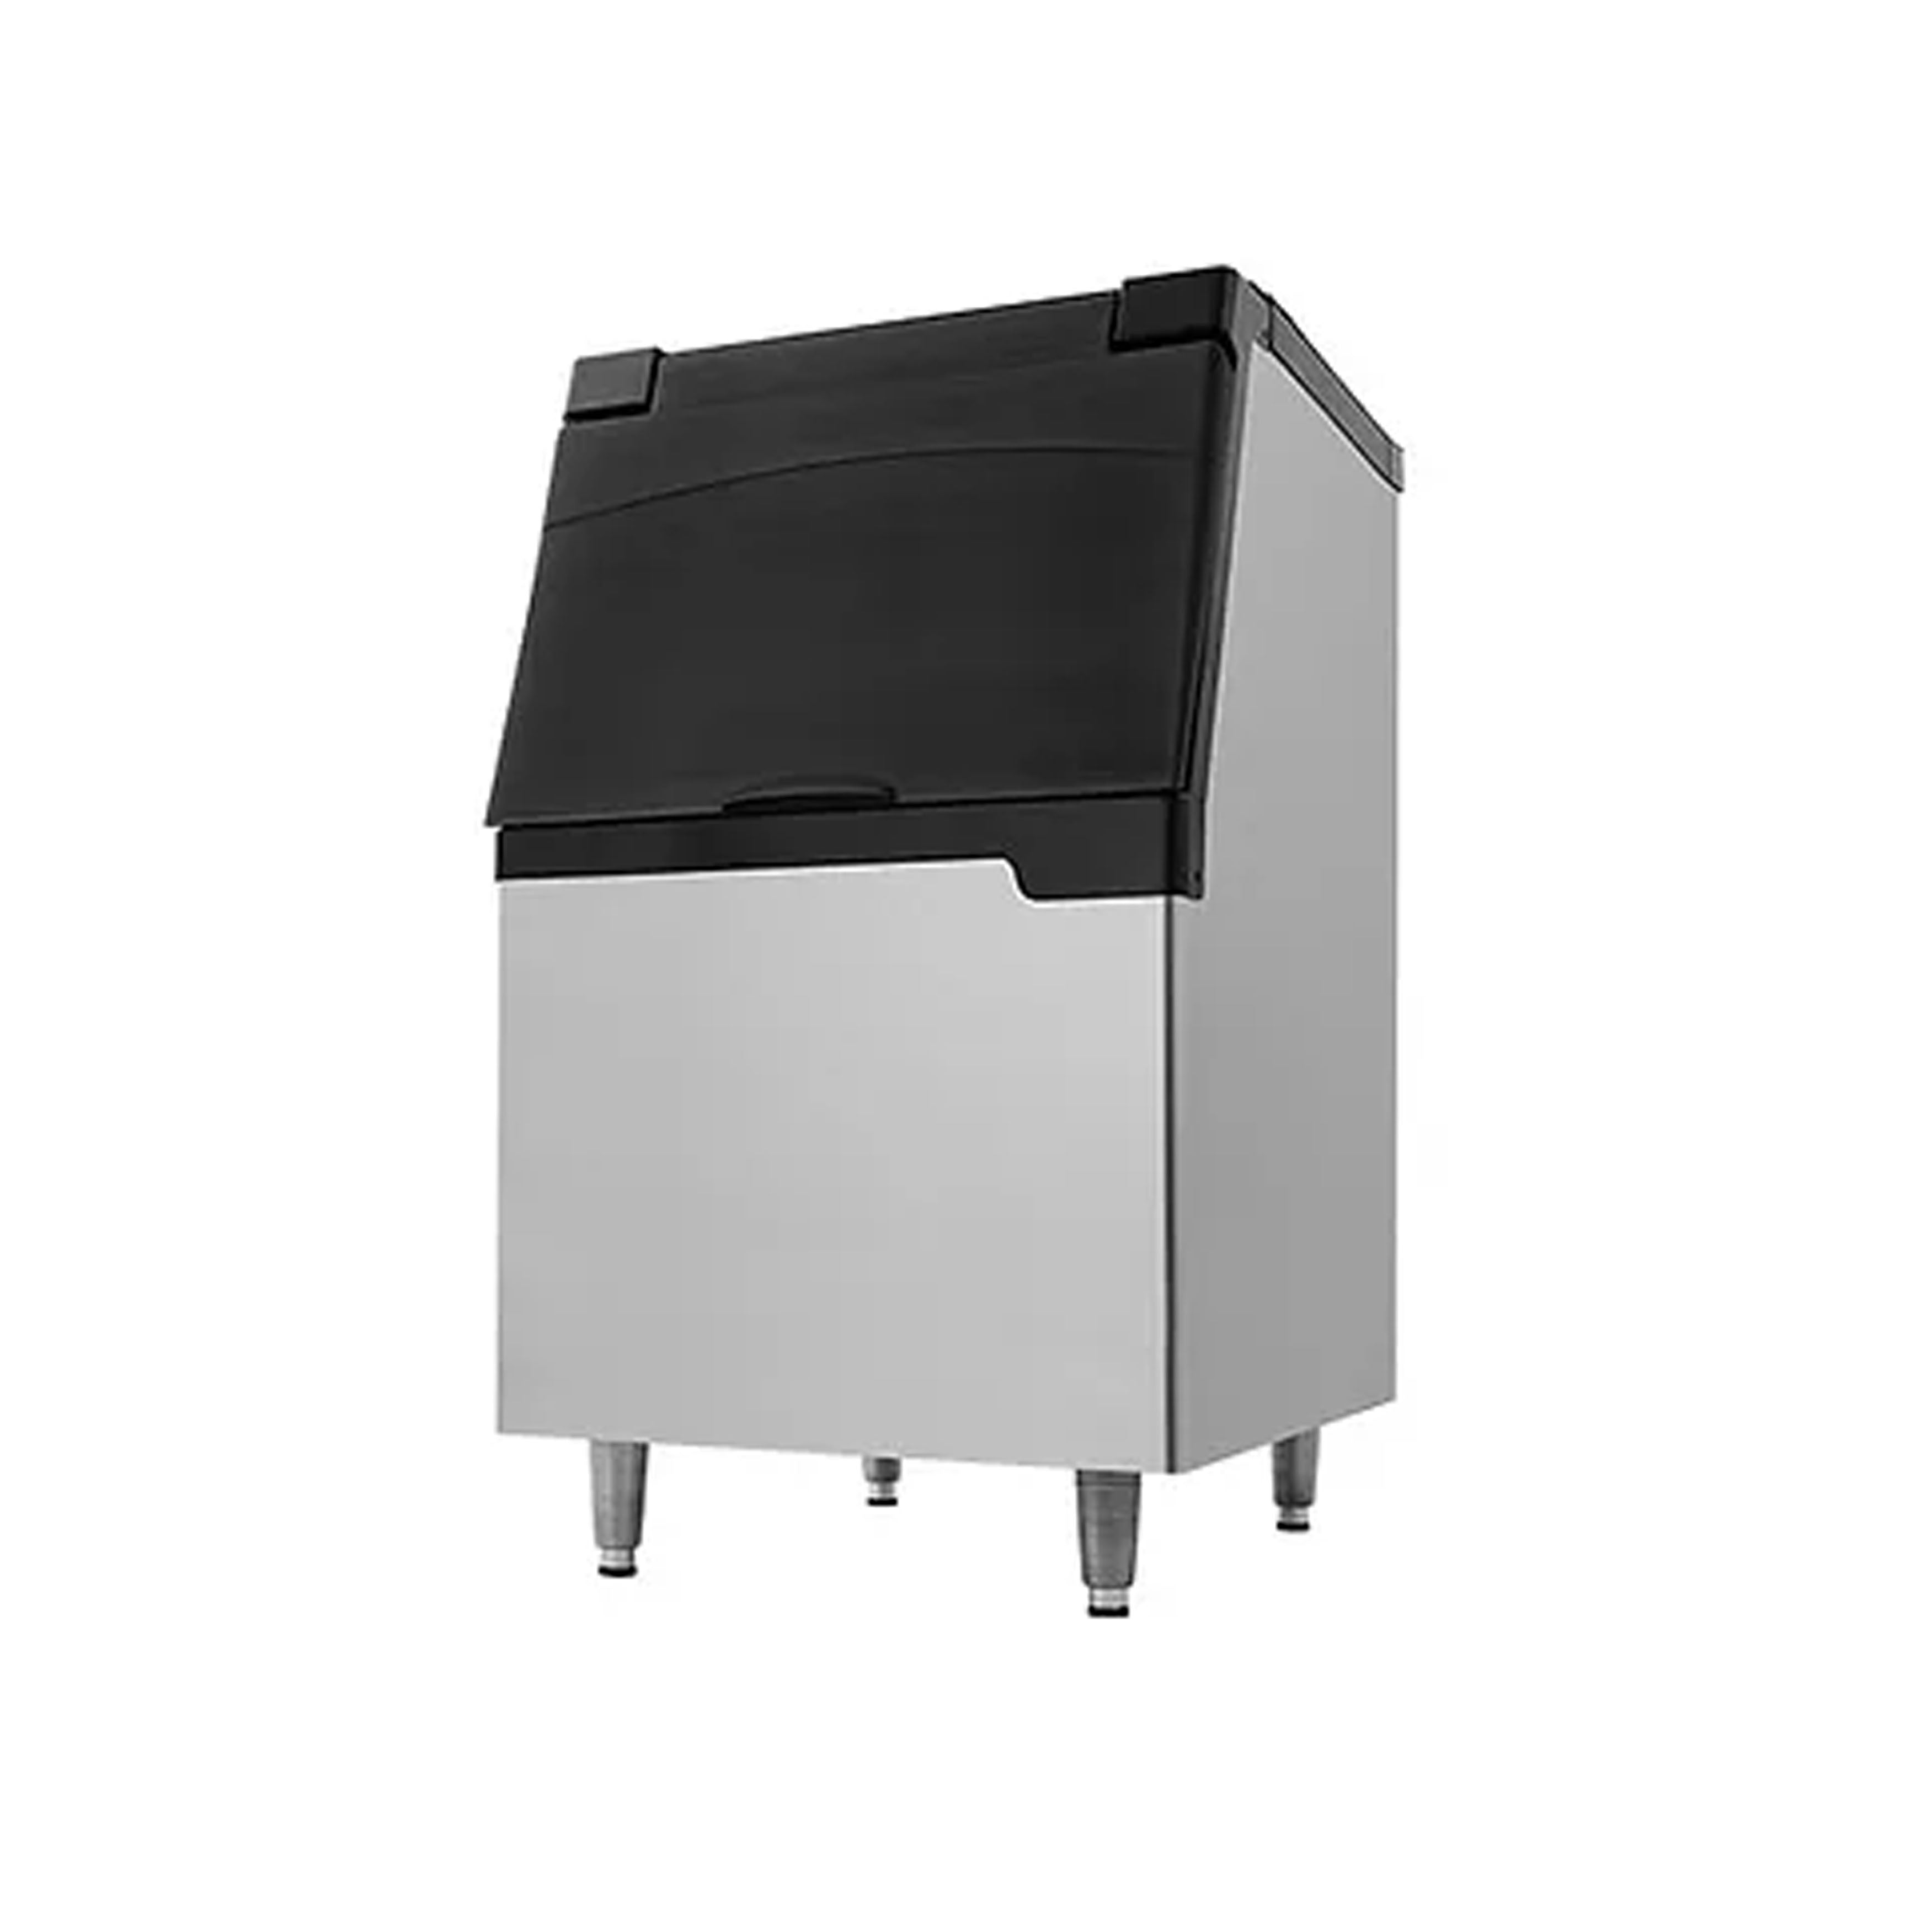 Icetro - IB-033, Commercial 30" Wide Stainless steel Ice Bin 350lbs